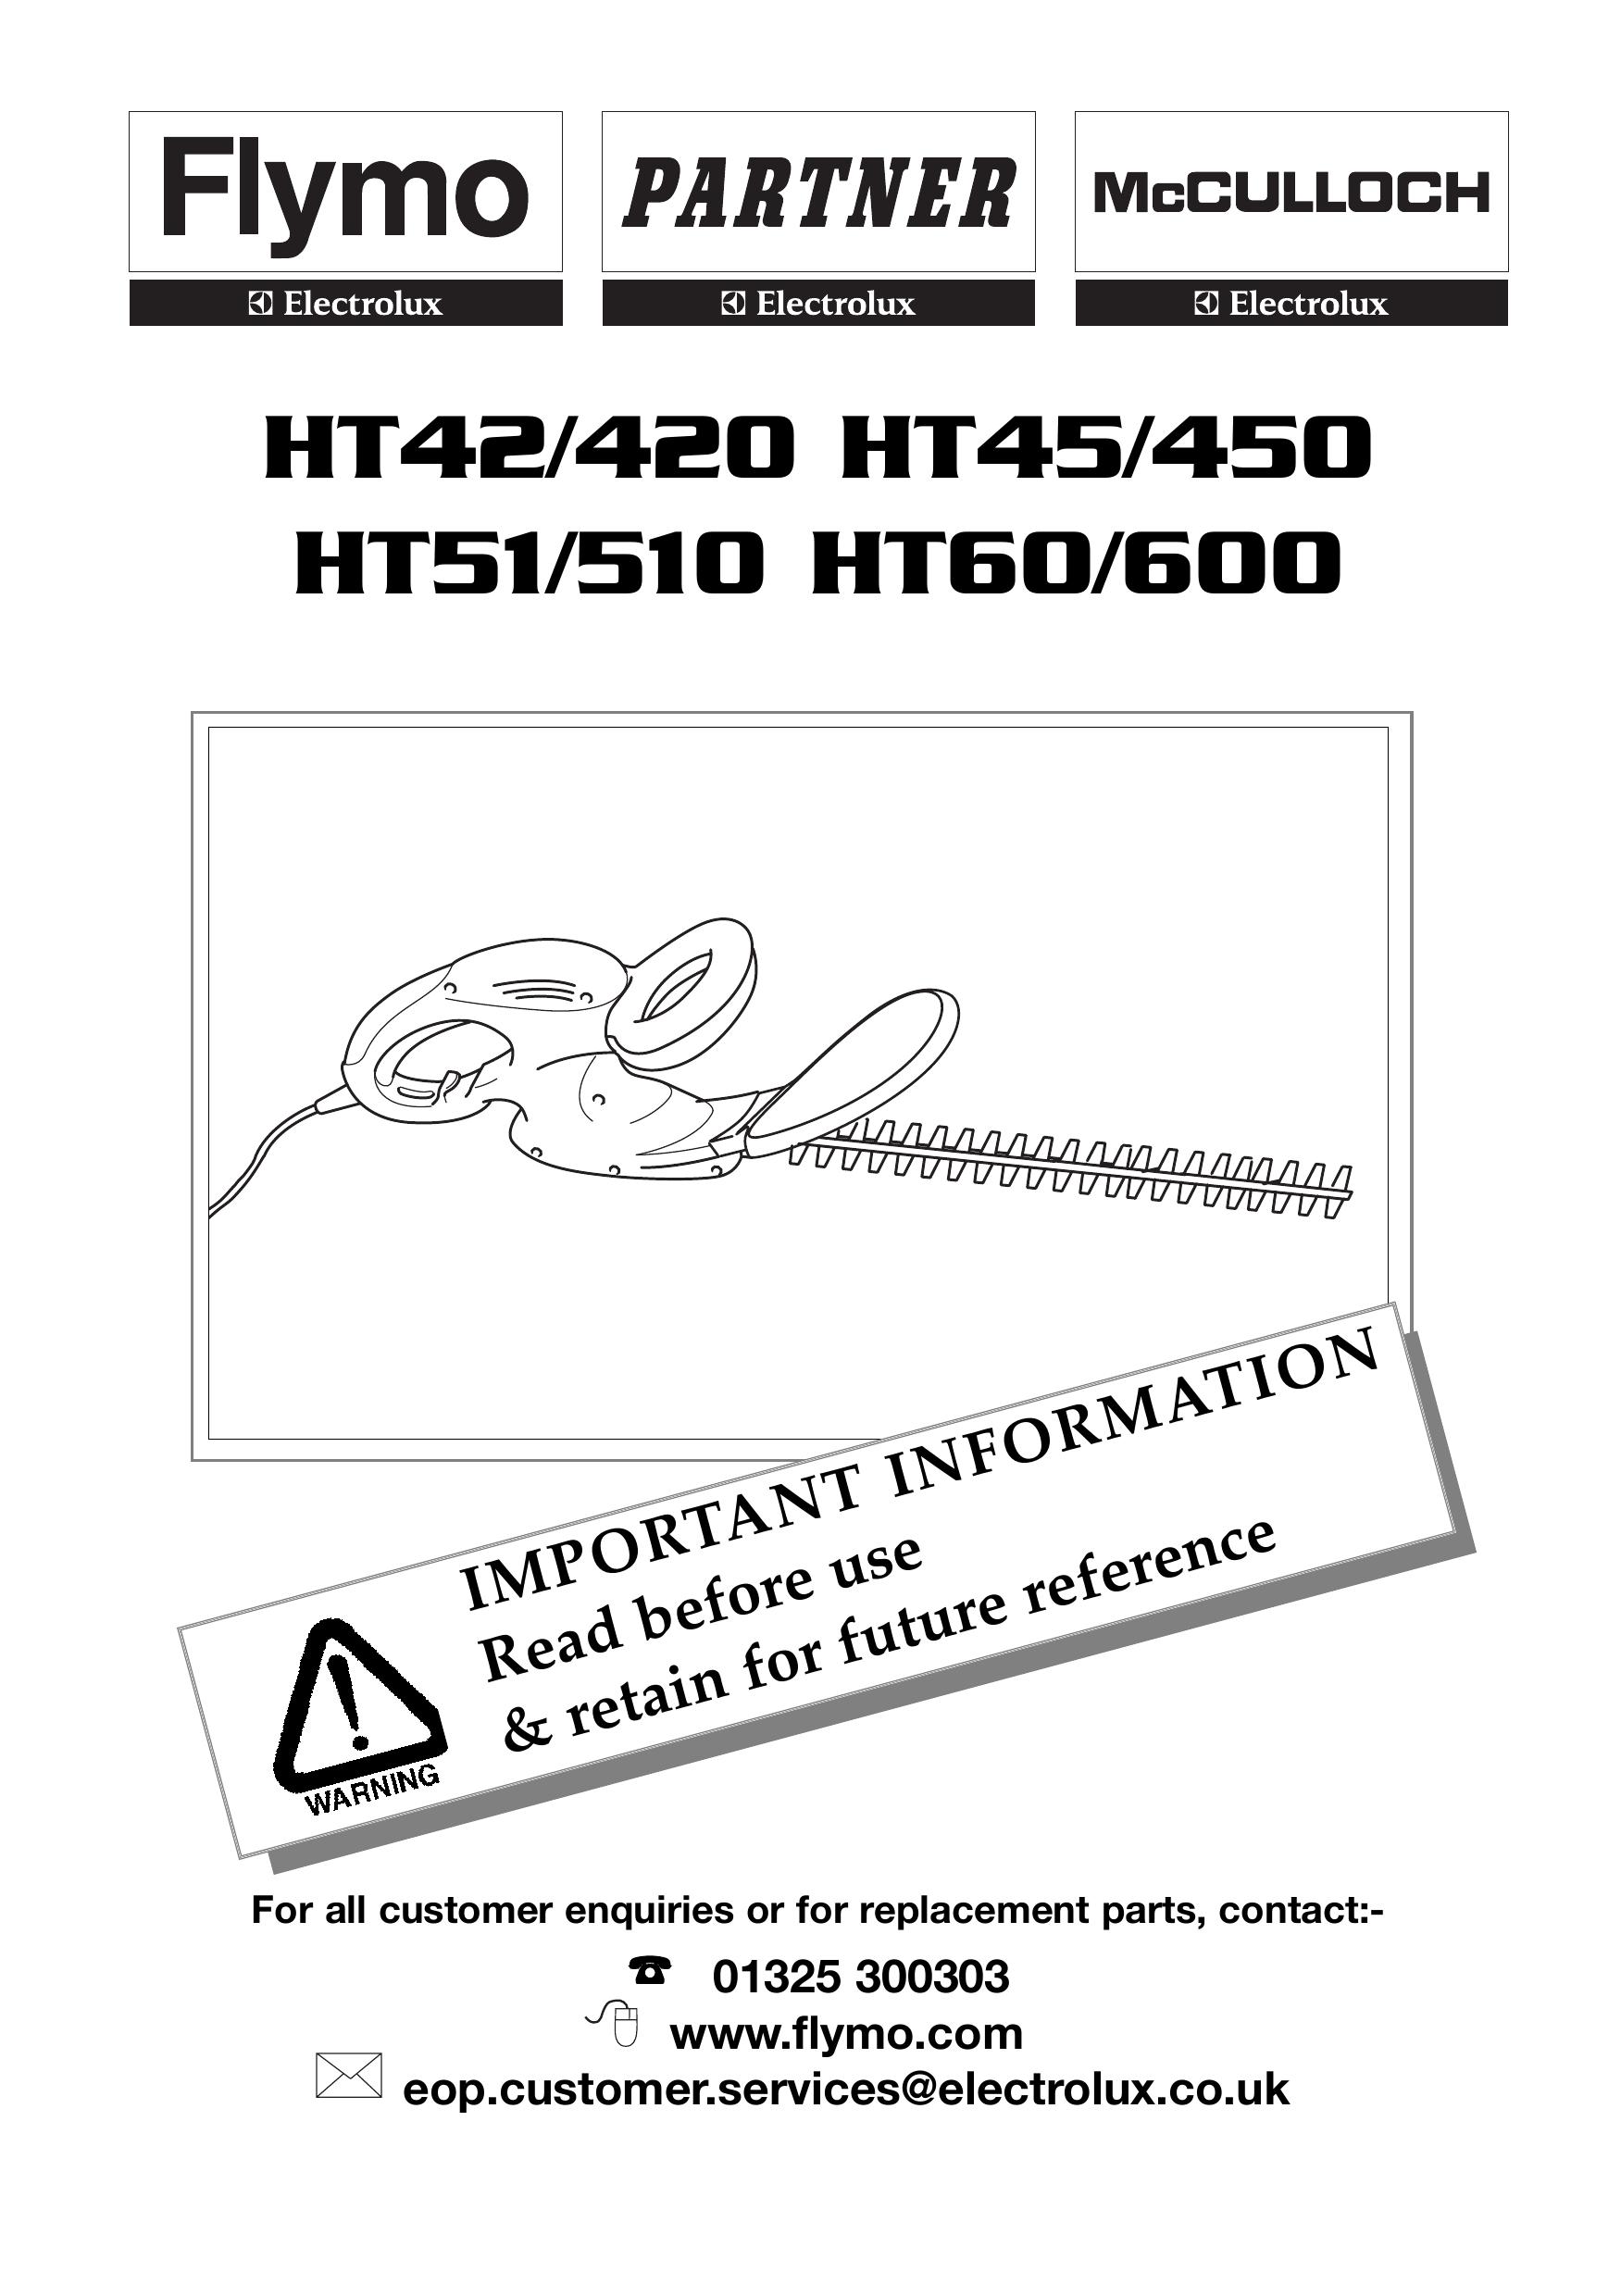 Flymo HT51 Chainsaw User Manual